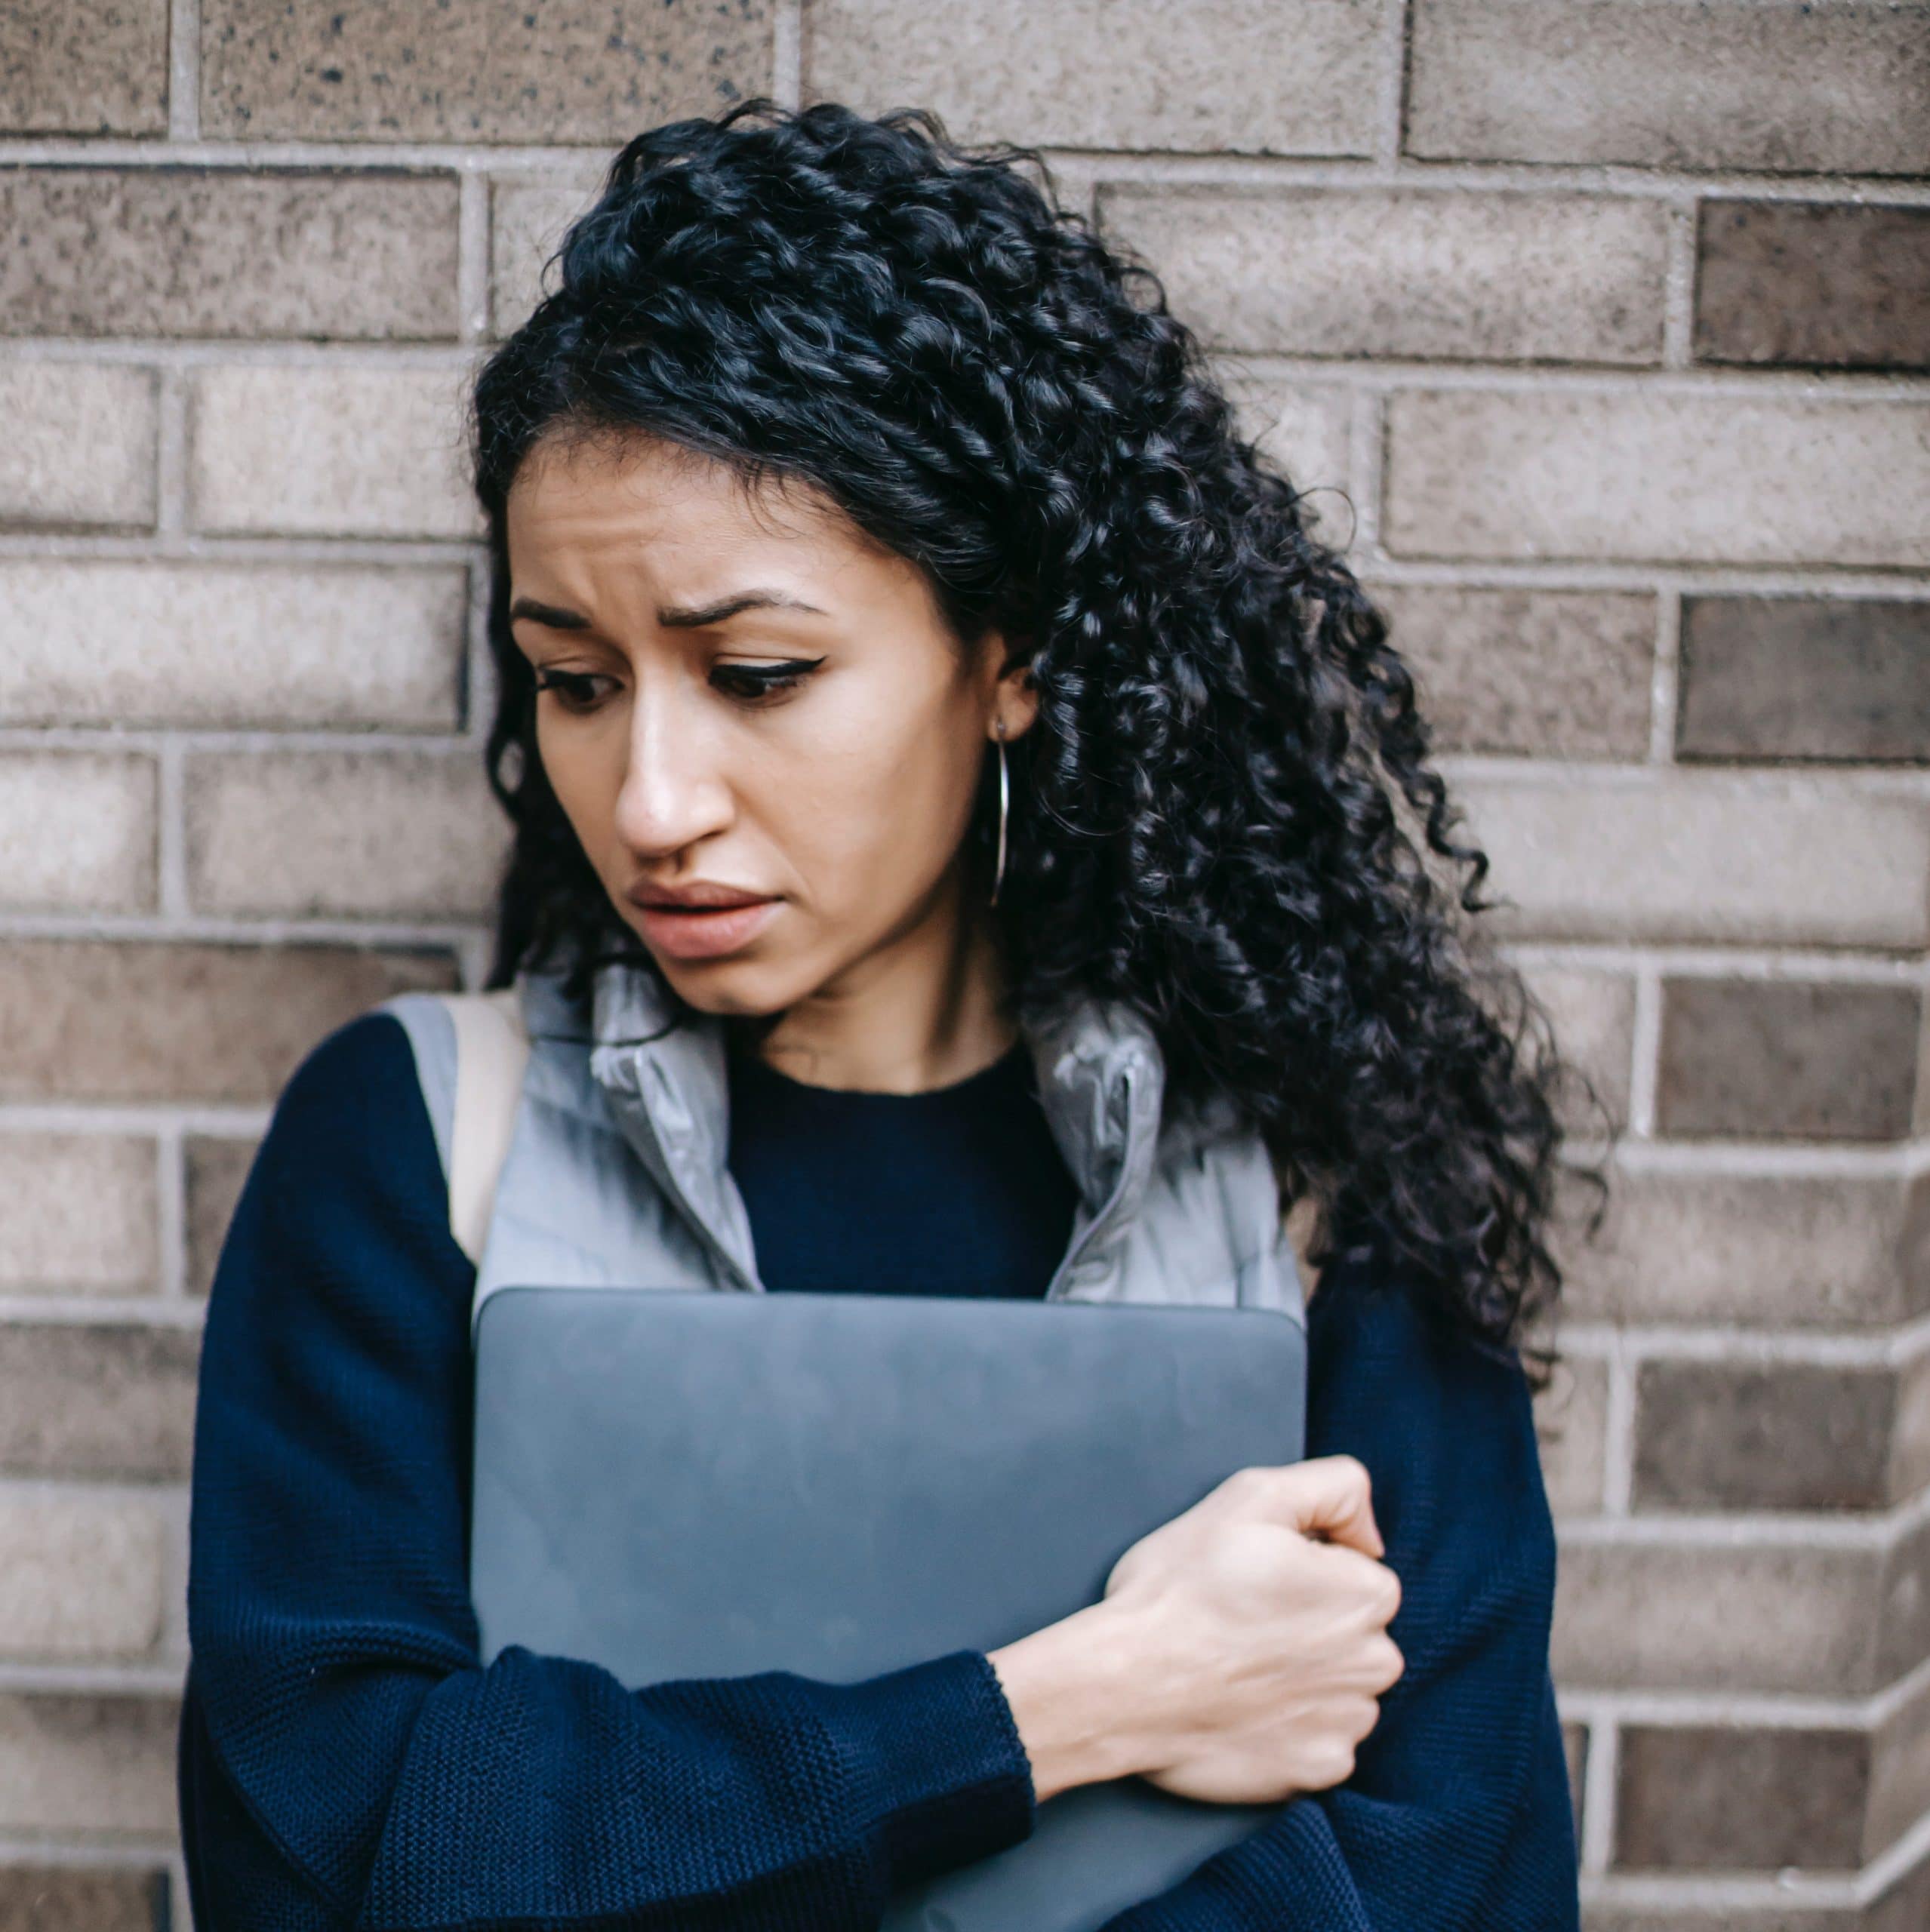 Trauma can affect anyone at any time. A Latina woman leans against a brick wall while holding a laptop and looking anxious.